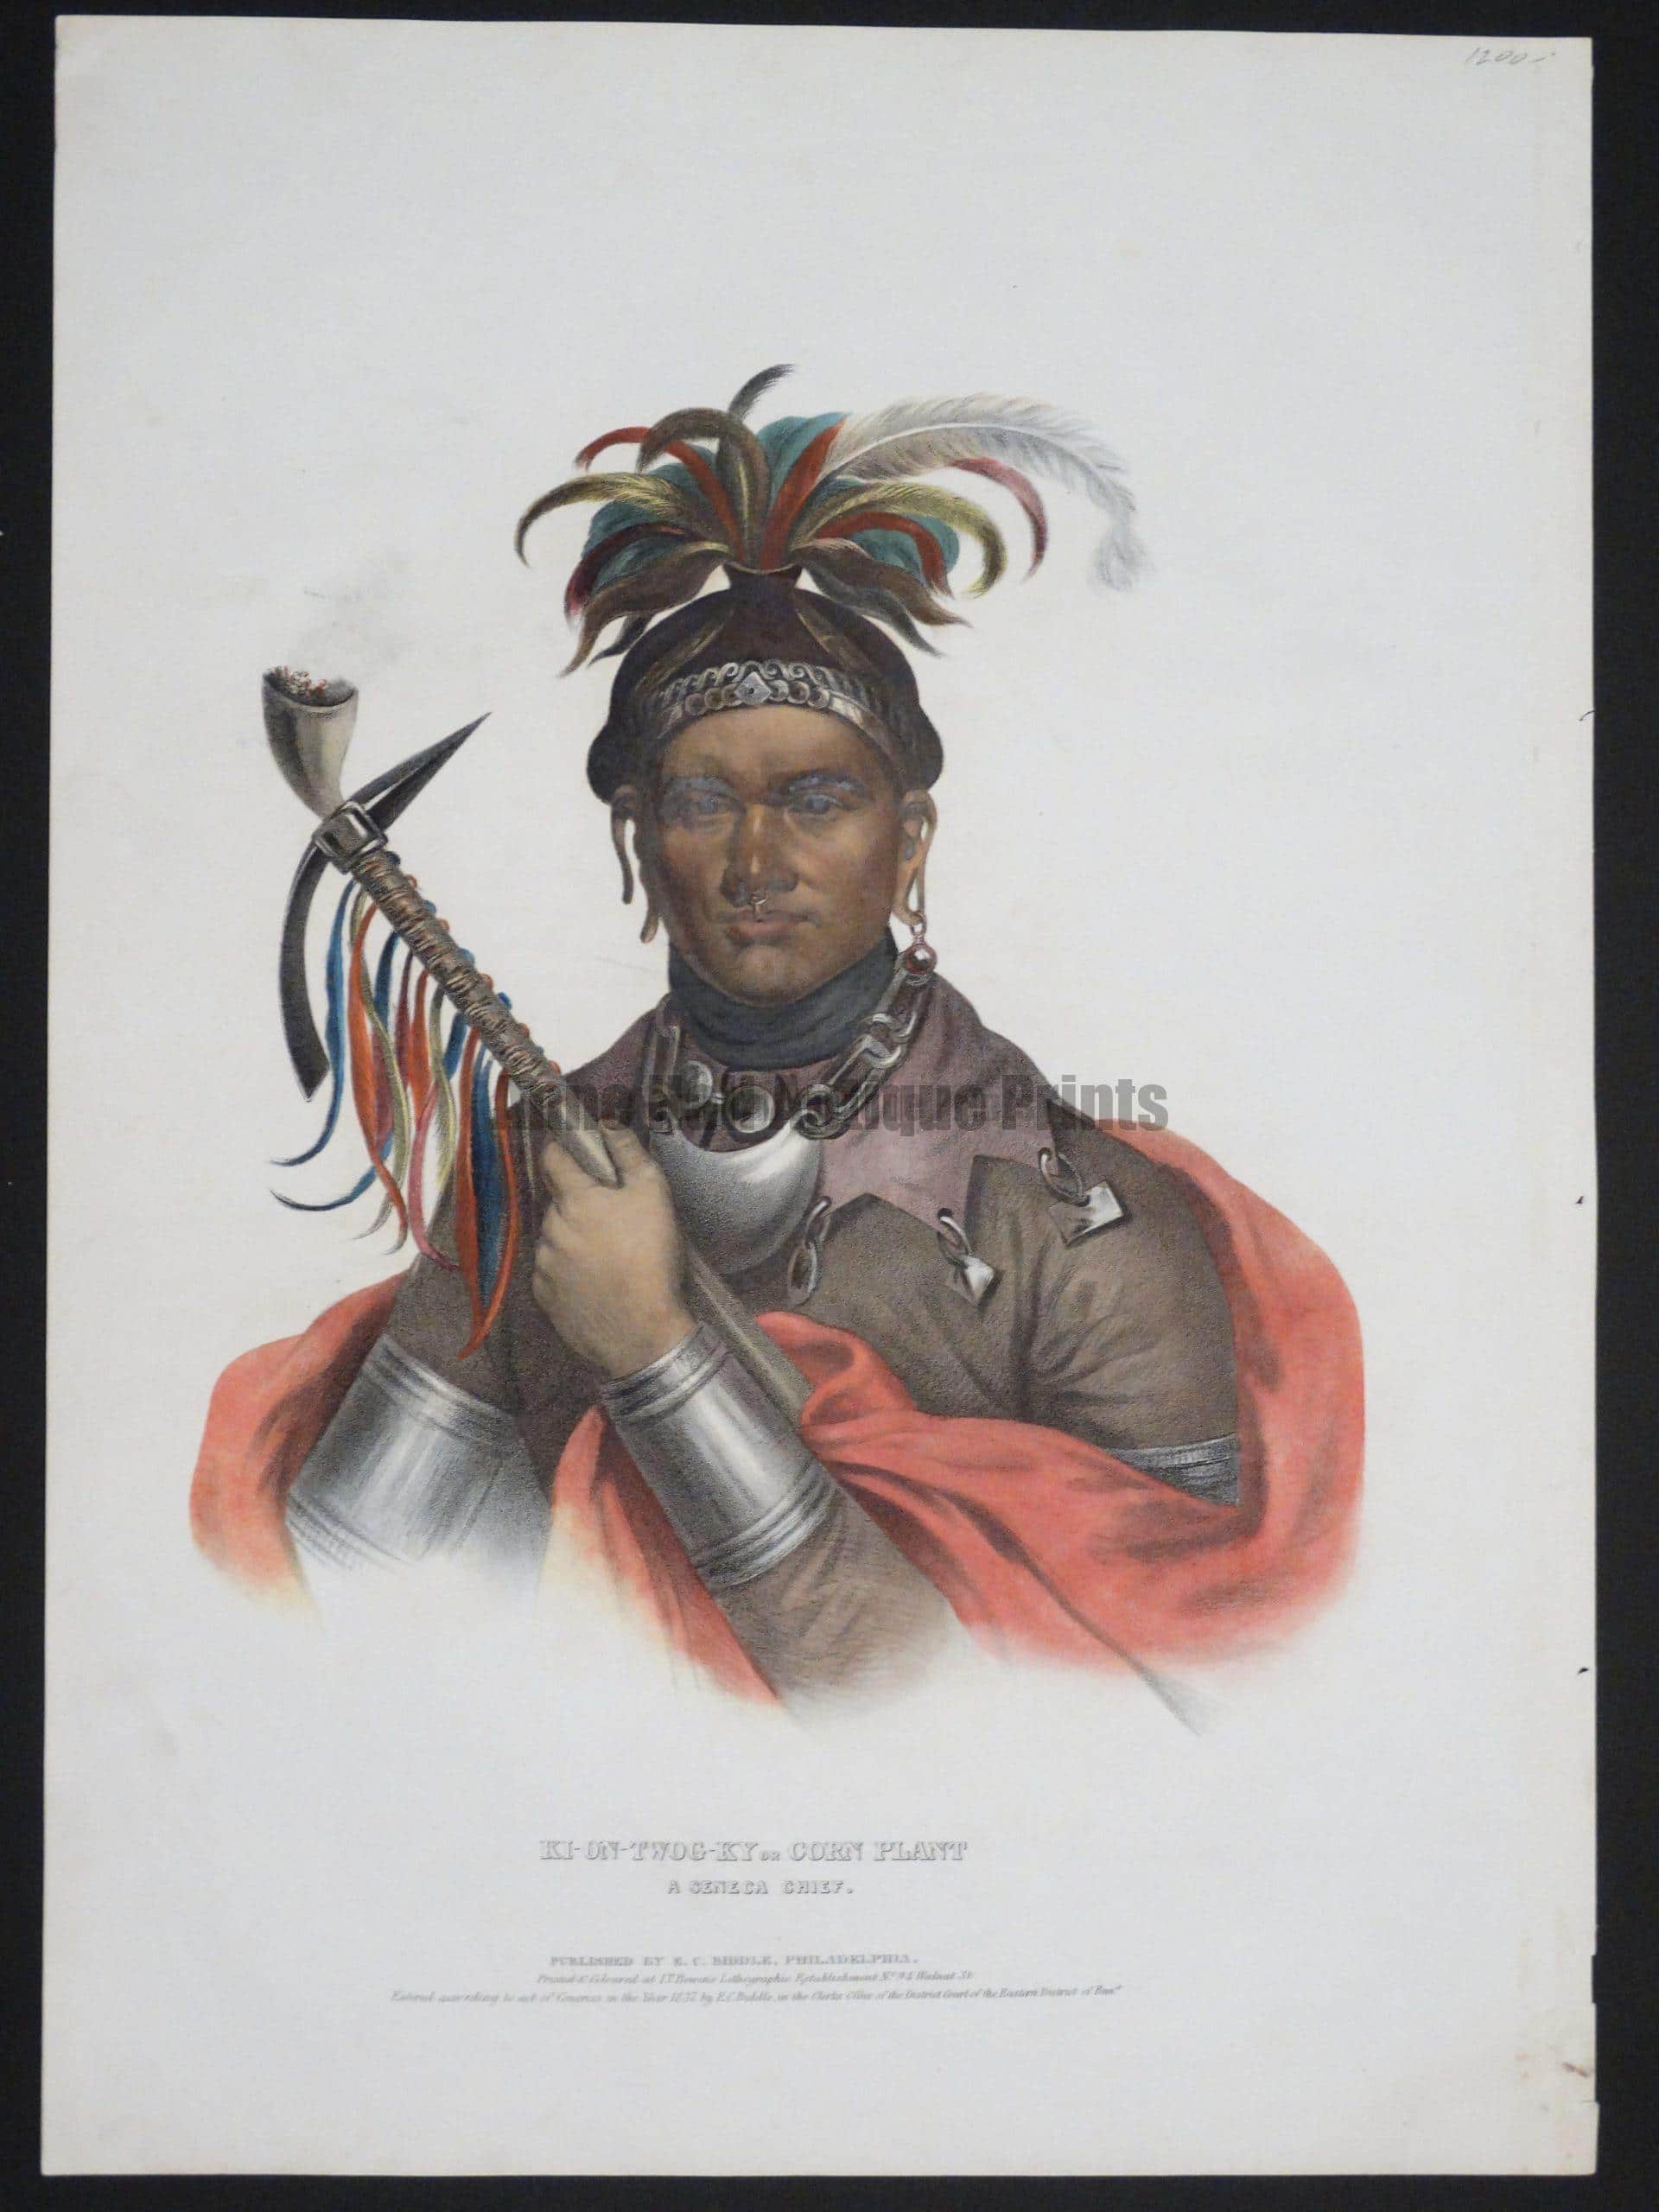 McKenney Hall Ki-On-Twog-Ky or "Corn Plant," stunning 200 year old lithograph of Seneca Chief, holding a feathered pipe and ornate feathered head-dress.